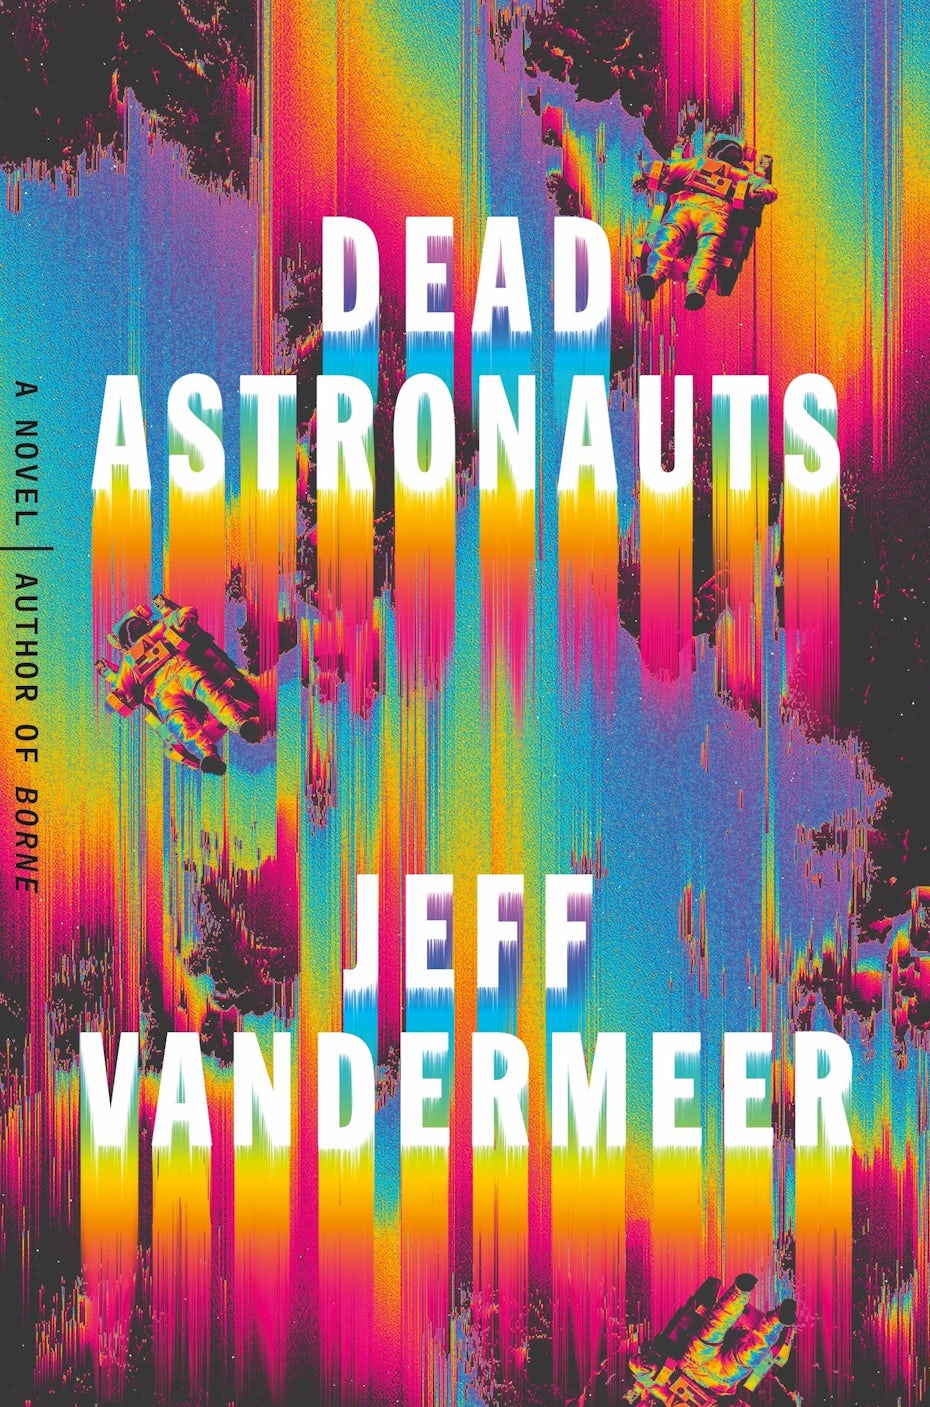 book cover trends 2020 example with psychedelic, bright rainbow effect